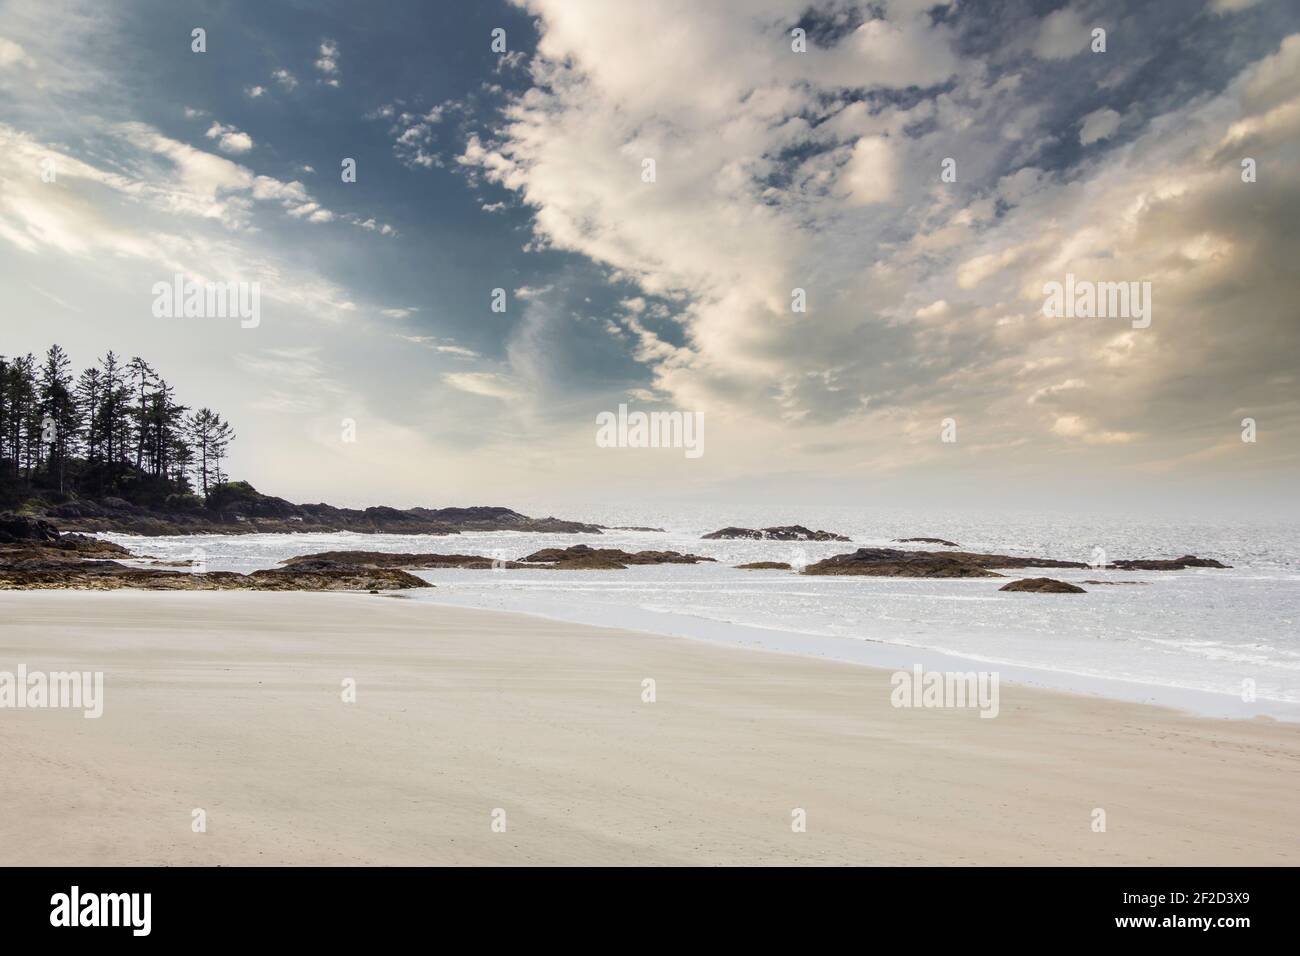 A sandy beach and ocean surf at Pacific Rim National Park on Vancouver Island British Columbia Canada. Stock Photo